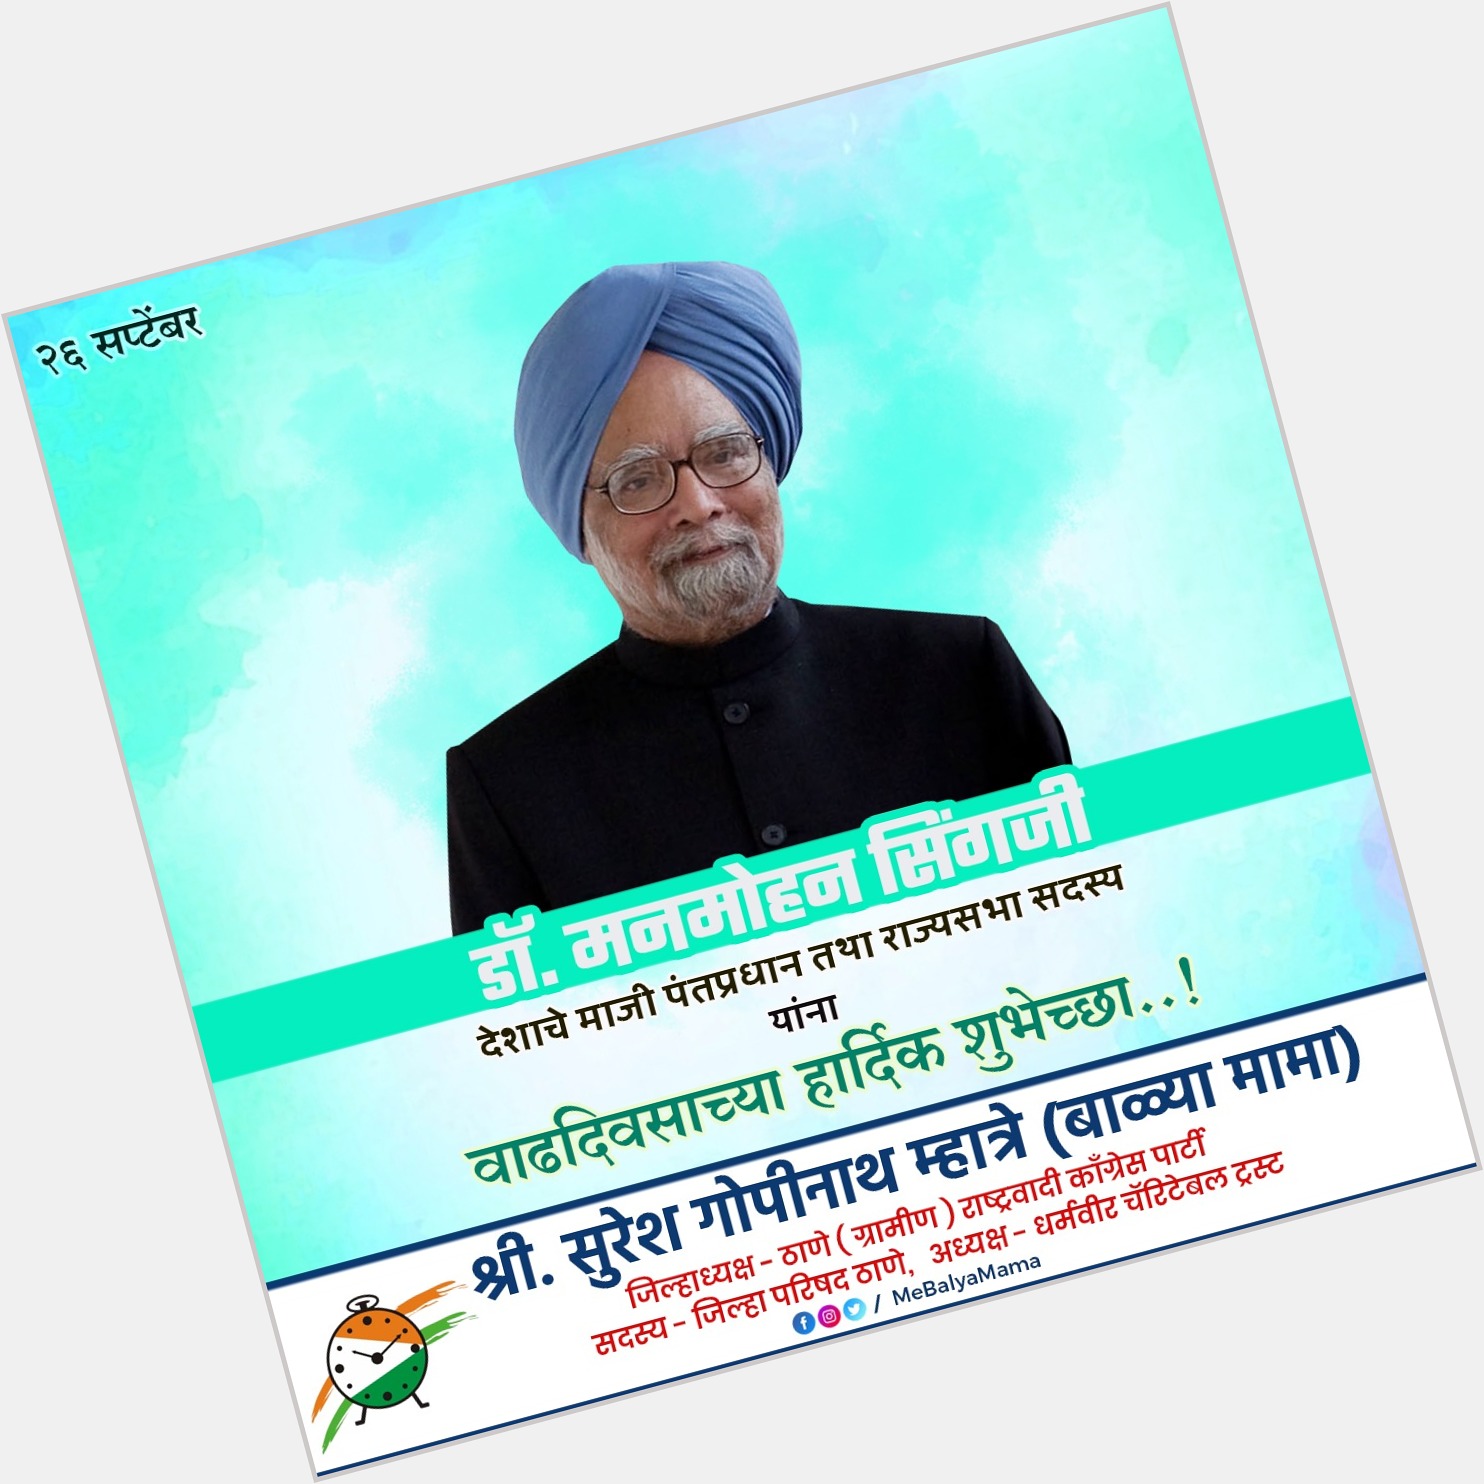 Warm Birthday Wishes to former Prime Minister Dr. Manmohan Singh ji.
Wishing him a healthy and happy life ahead! 